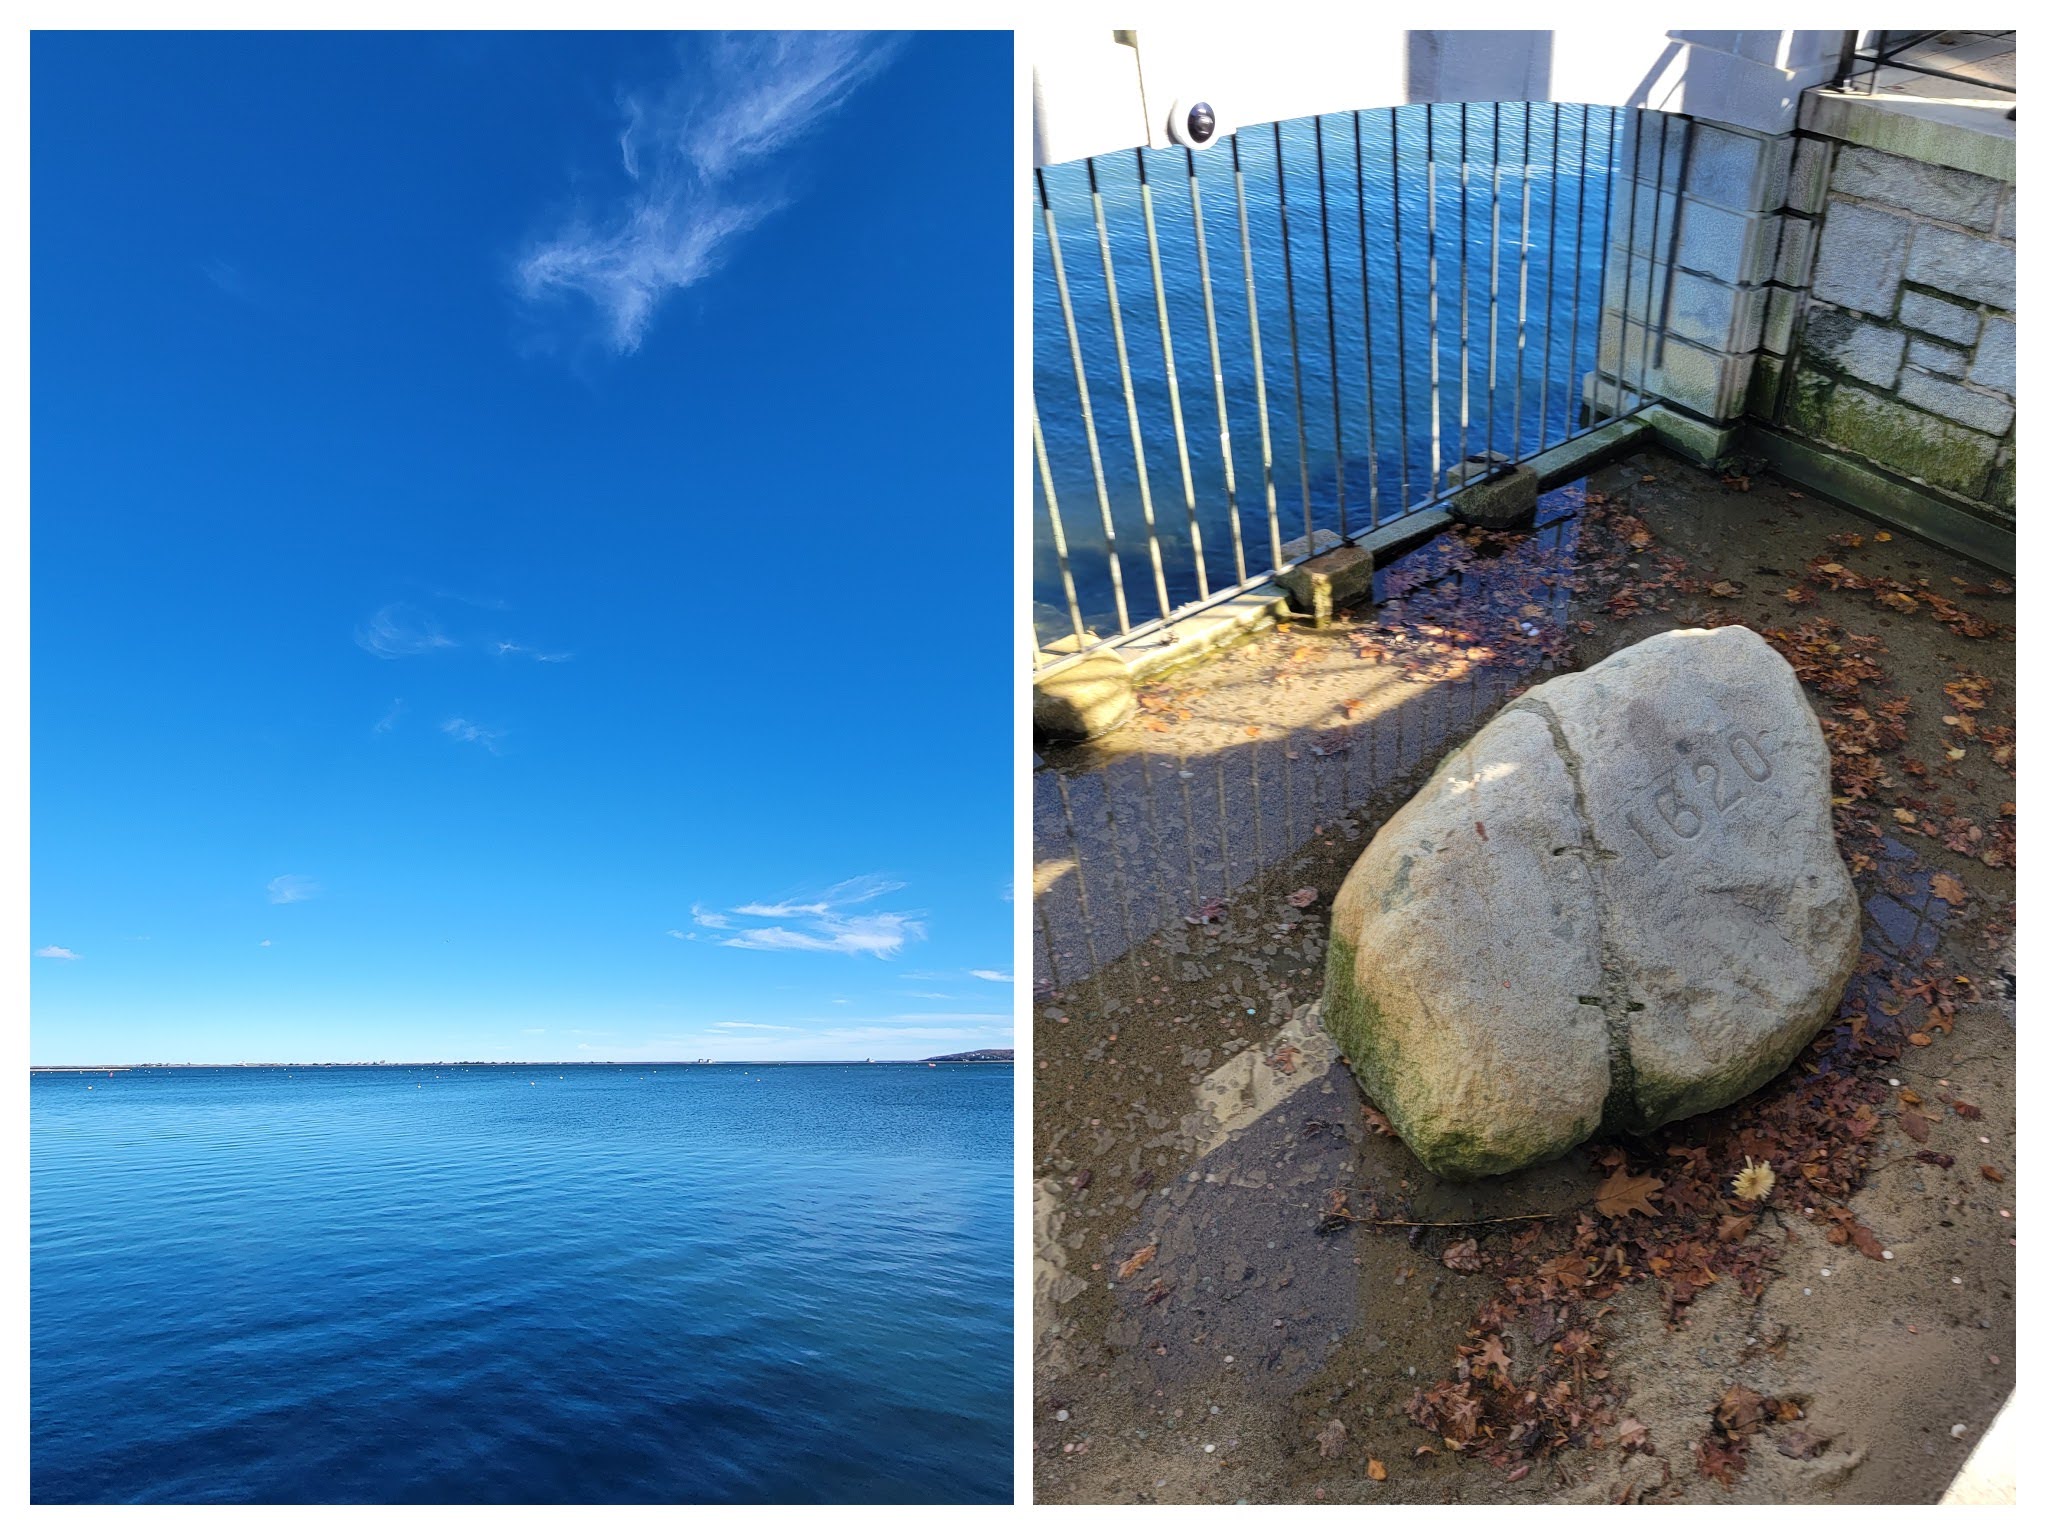 Plymouth Rock, and the absolutely beautiful Cape Cod Bay